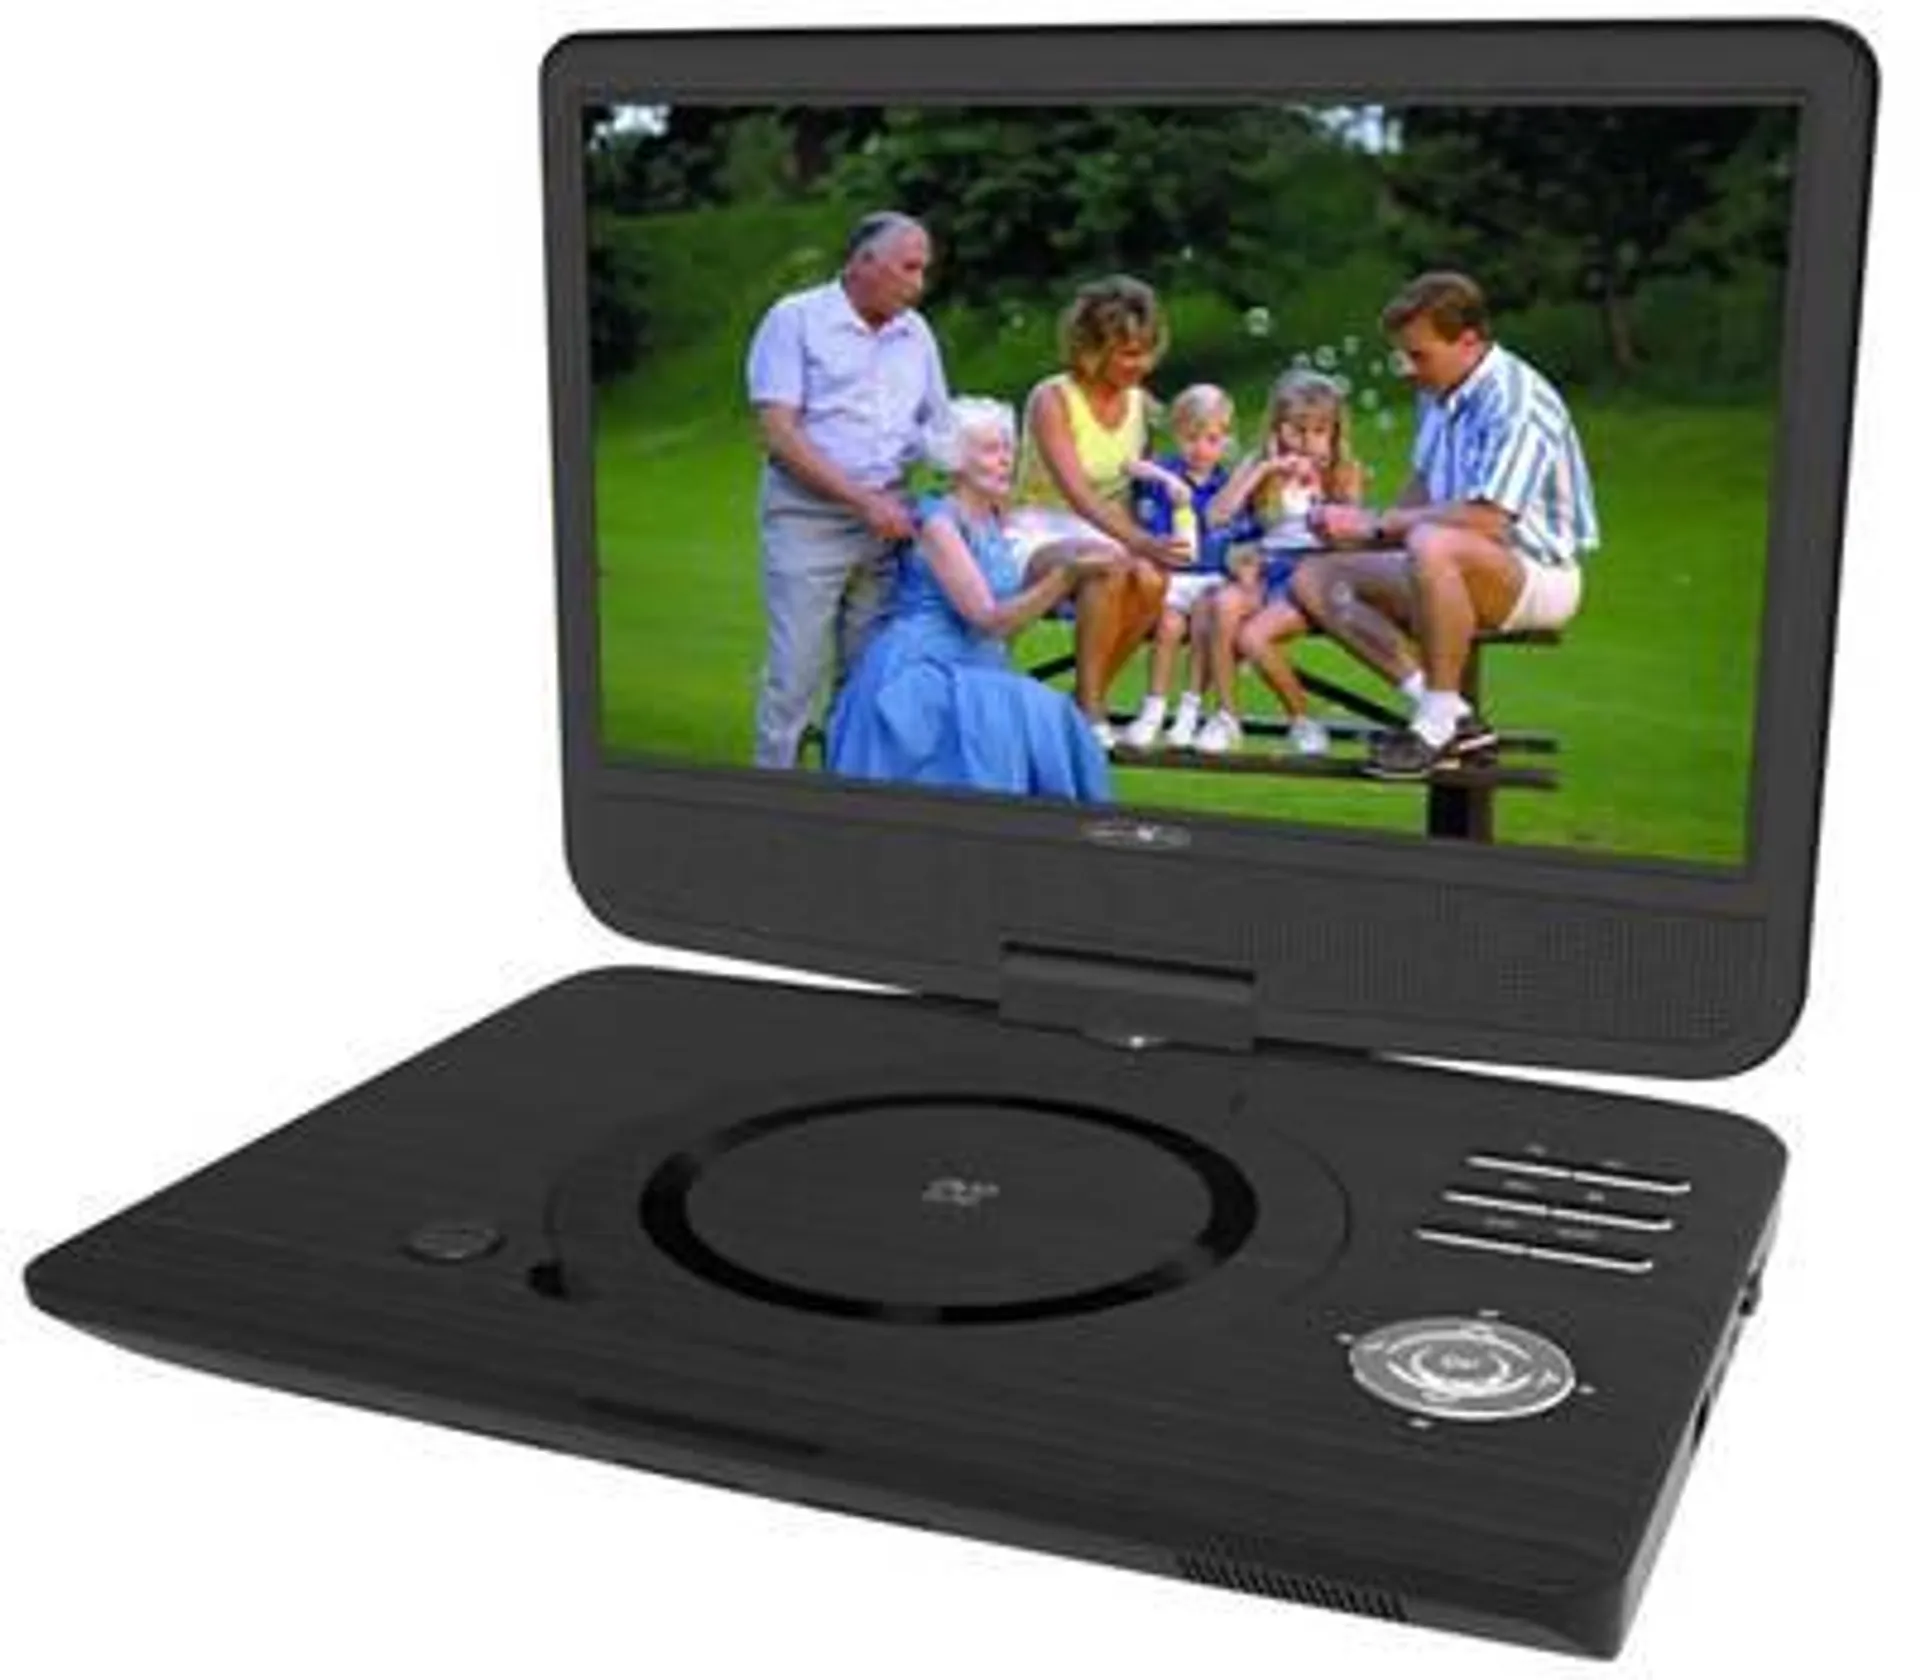 Reflexion Reflexion Portable DVD player 25.7 cm 10 inch incl. 12V car power cable, Battery-powered Black